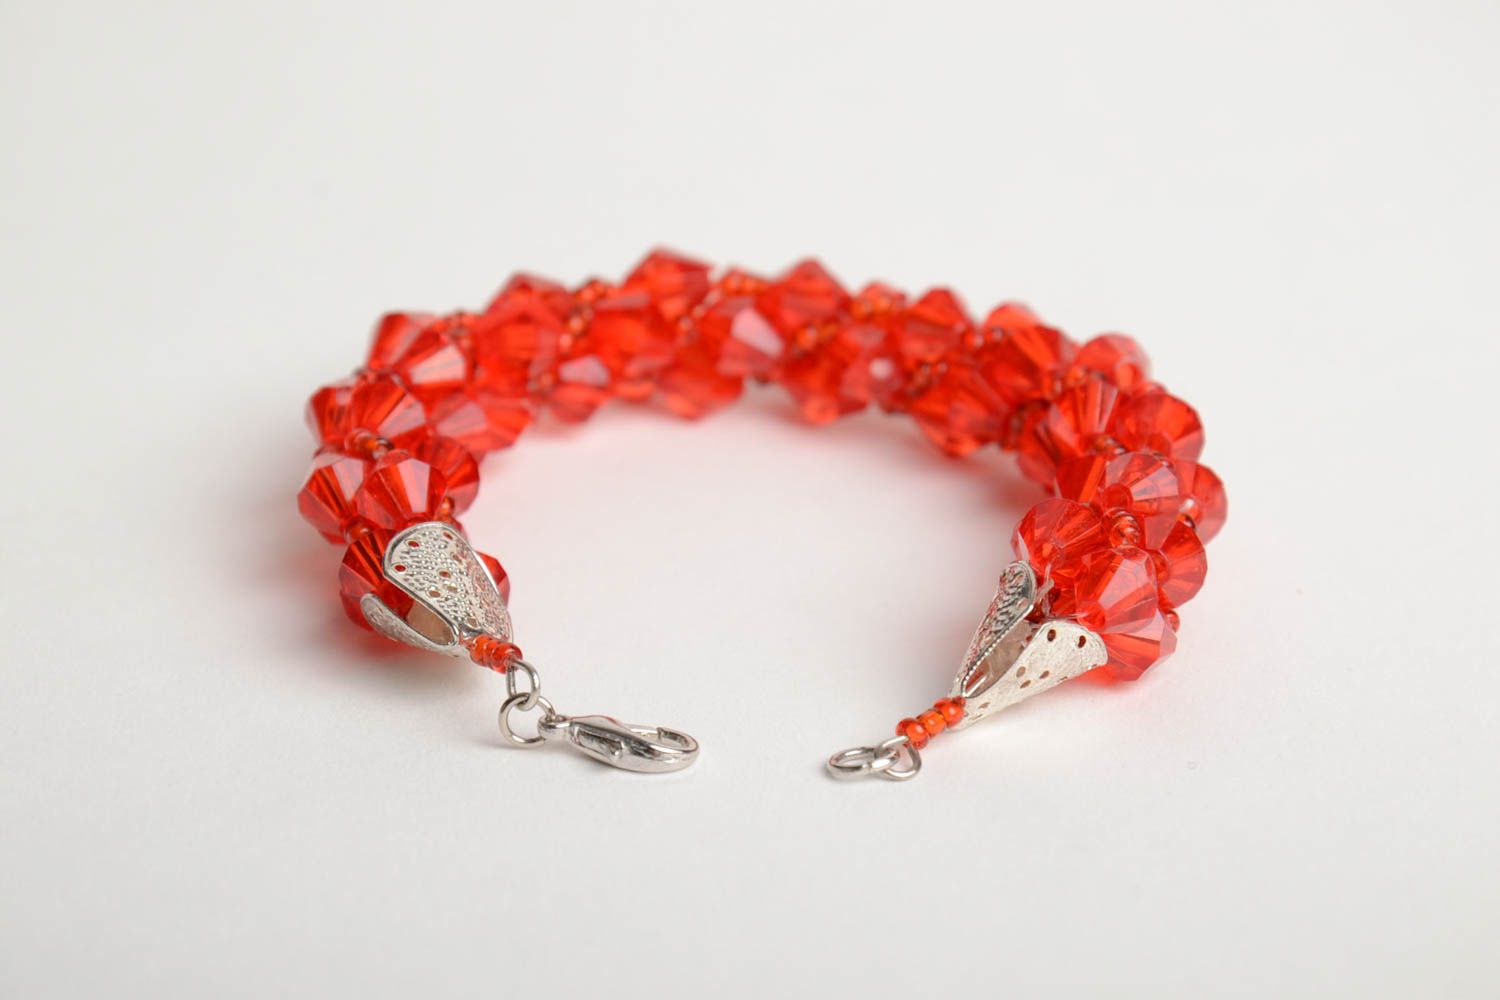 Handmade wrist bracelet crocheted of red Czech seed beads and faceted beads photo 4